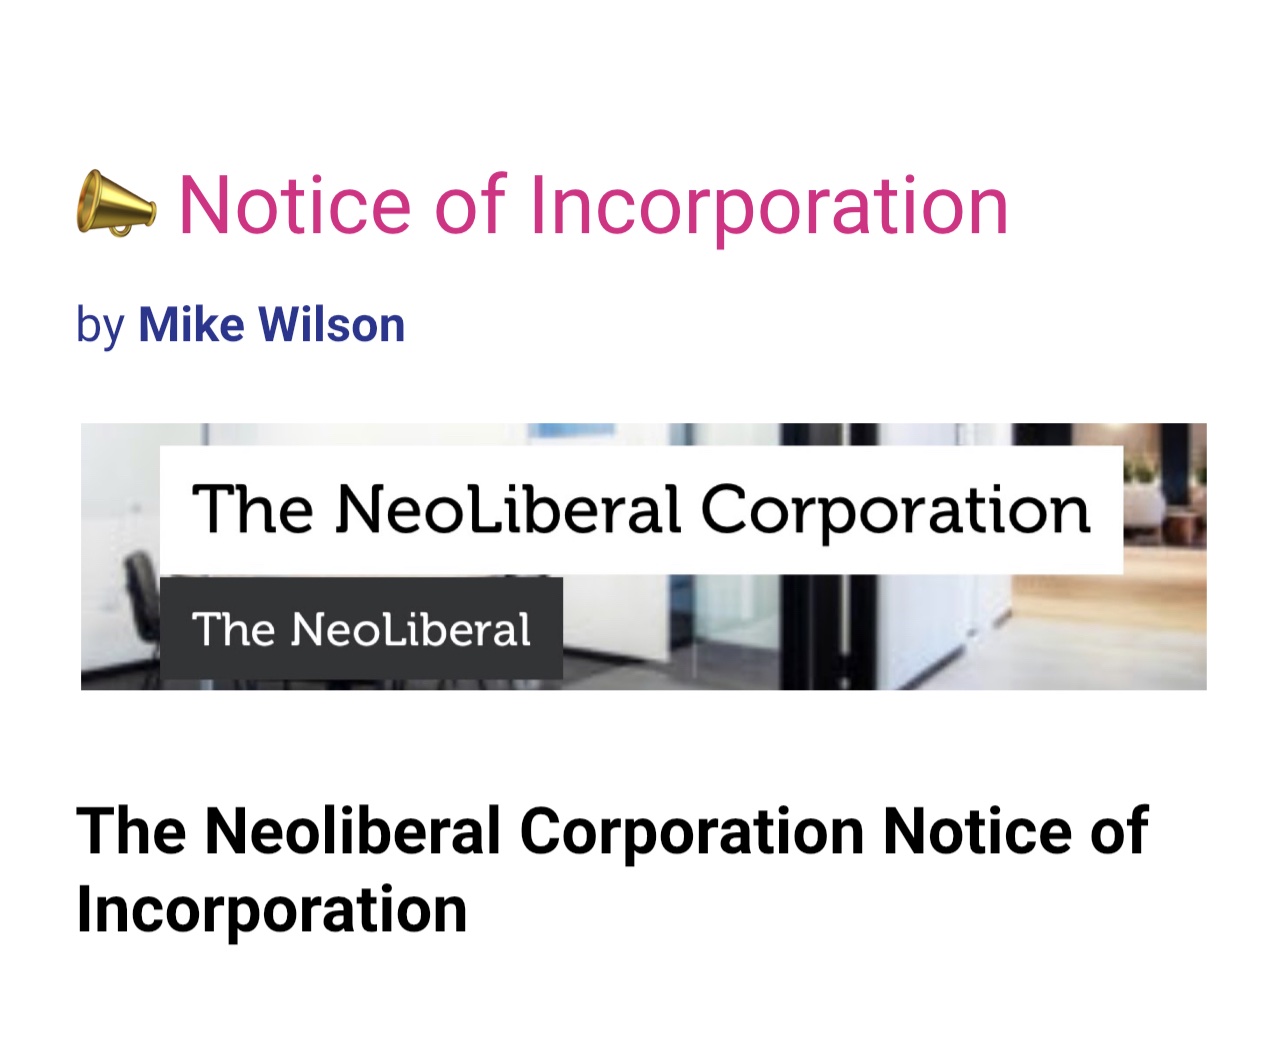 Notice of Incorporation